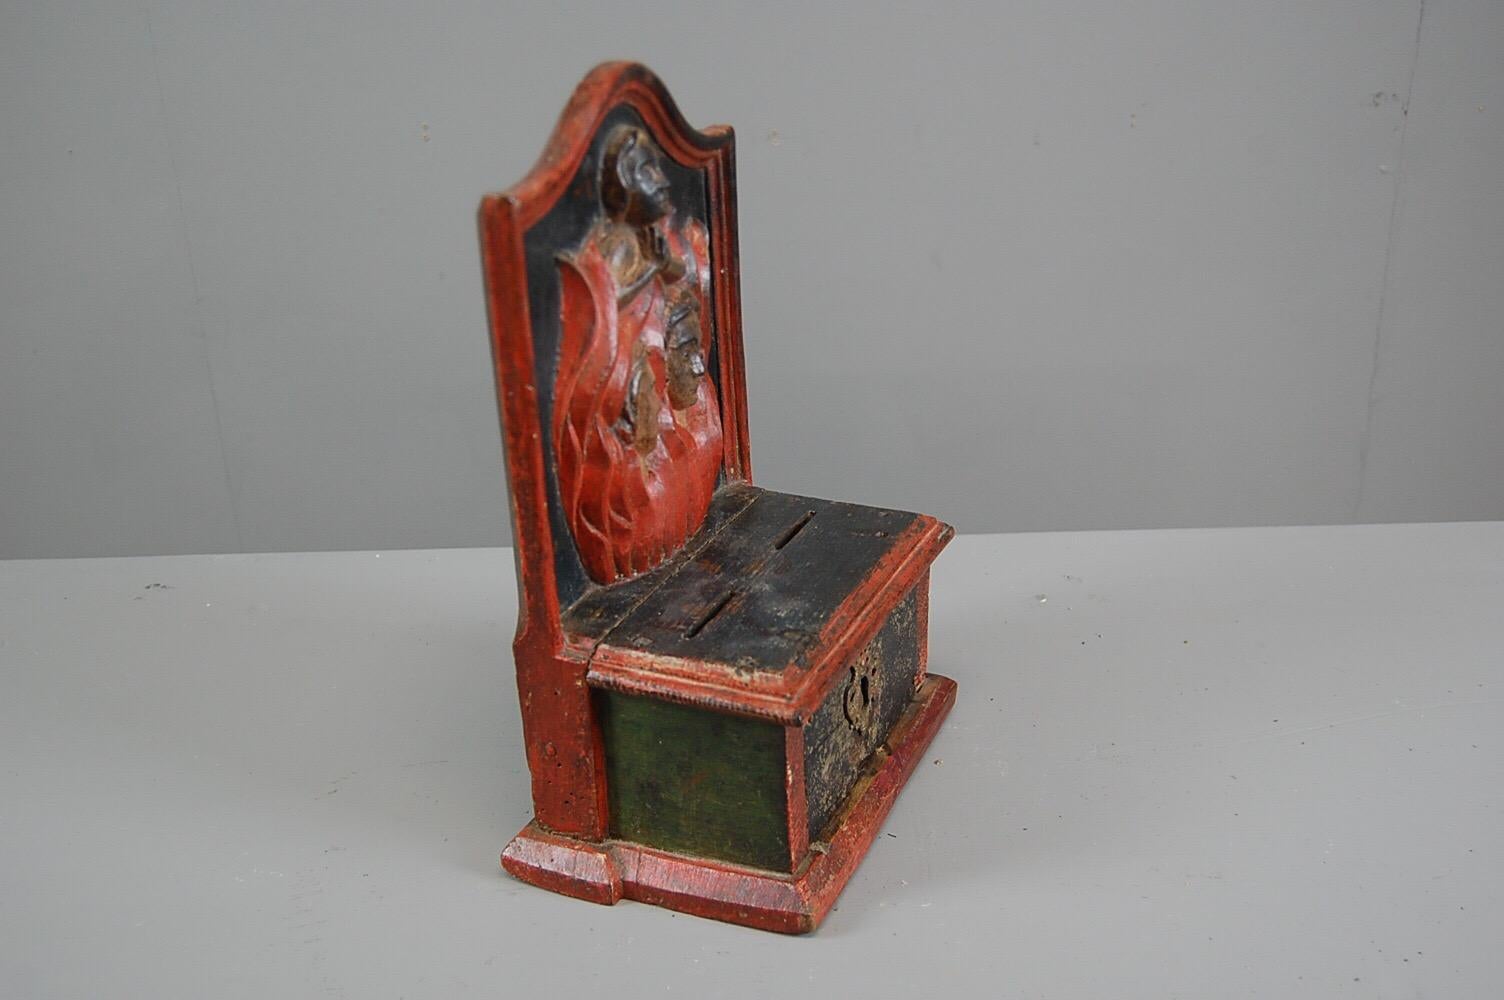 Polychromed Late 18th-Early 19th Century Church Collection Box